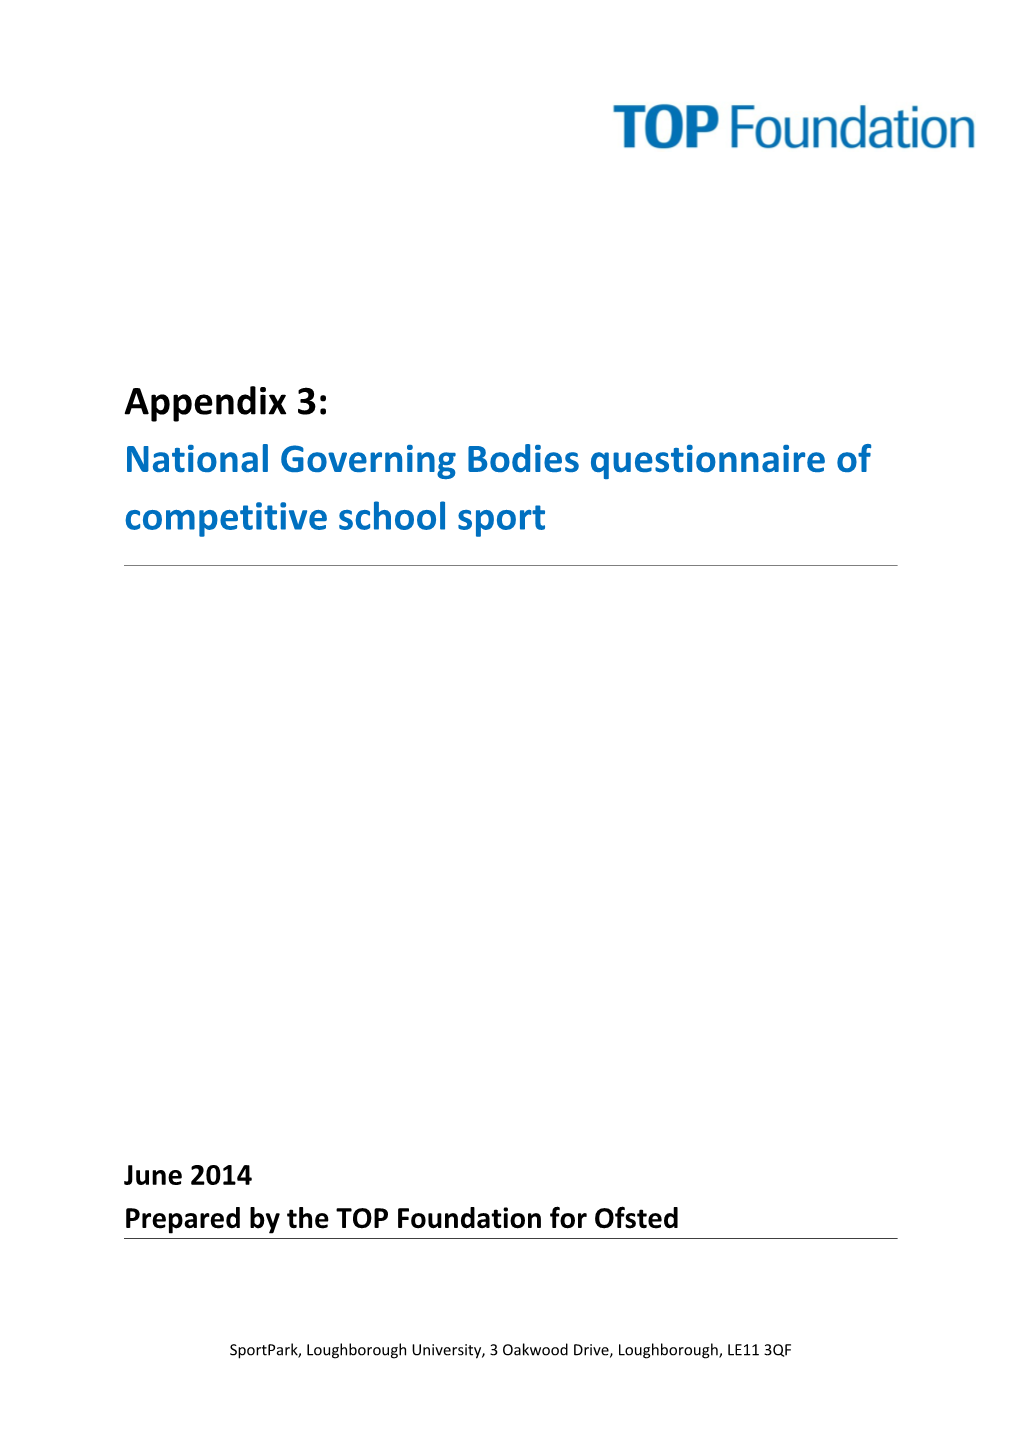 National Governing Bodiesquestionnaire of Competitive School Sport